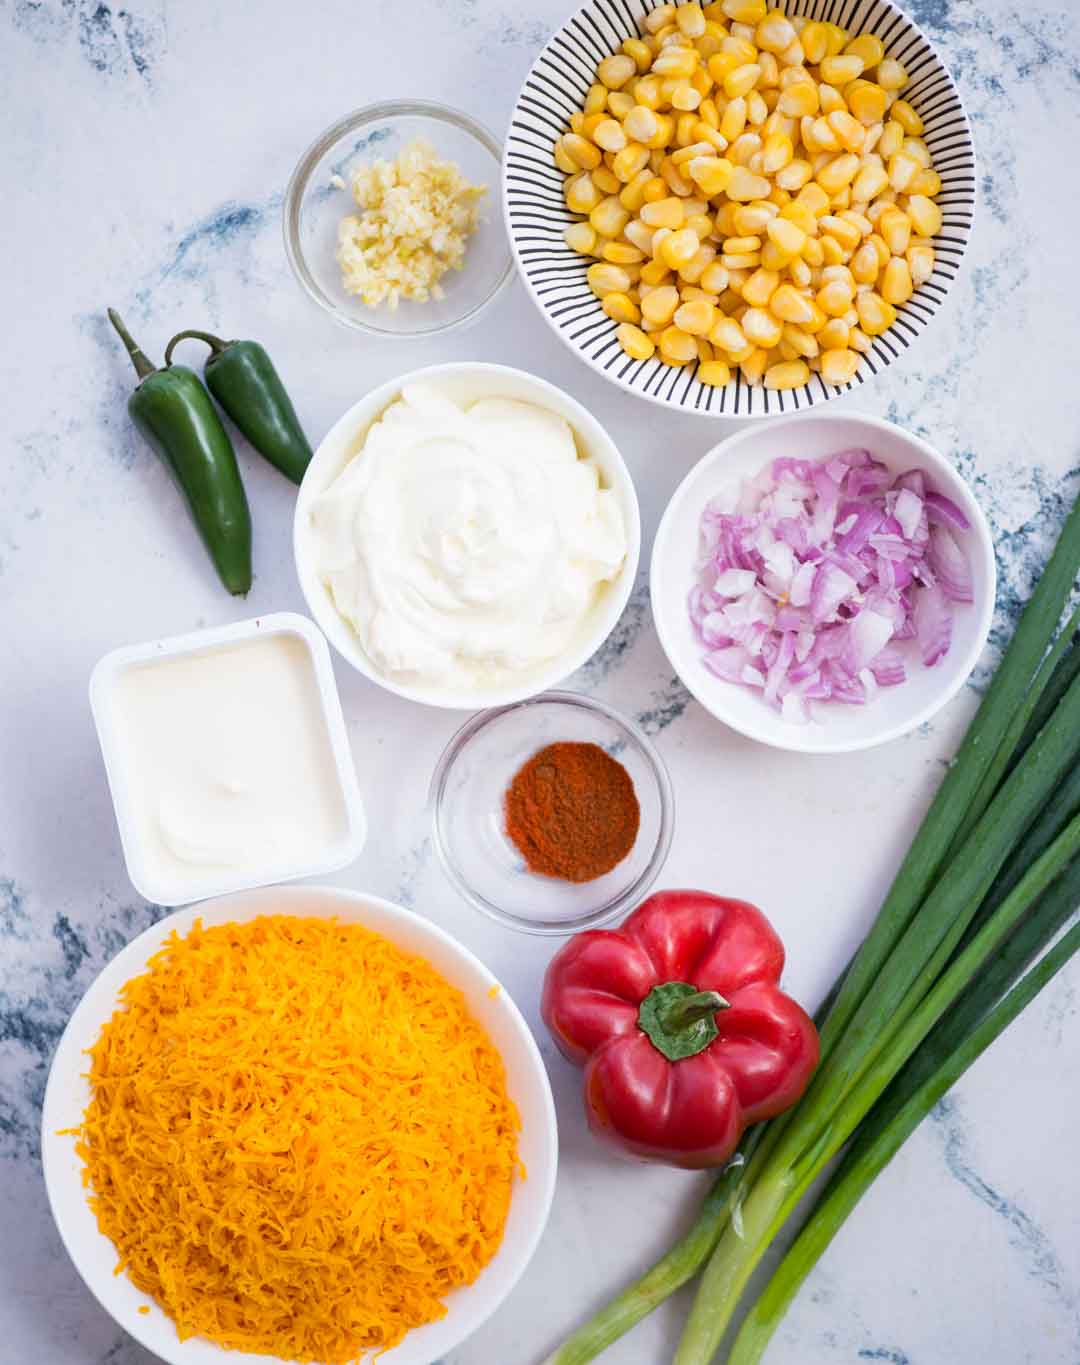 Ingredients shown to make corn dip - Corn, cheese, sour cream, bell pepper, onion, green onion, jalapeno, hot sauce